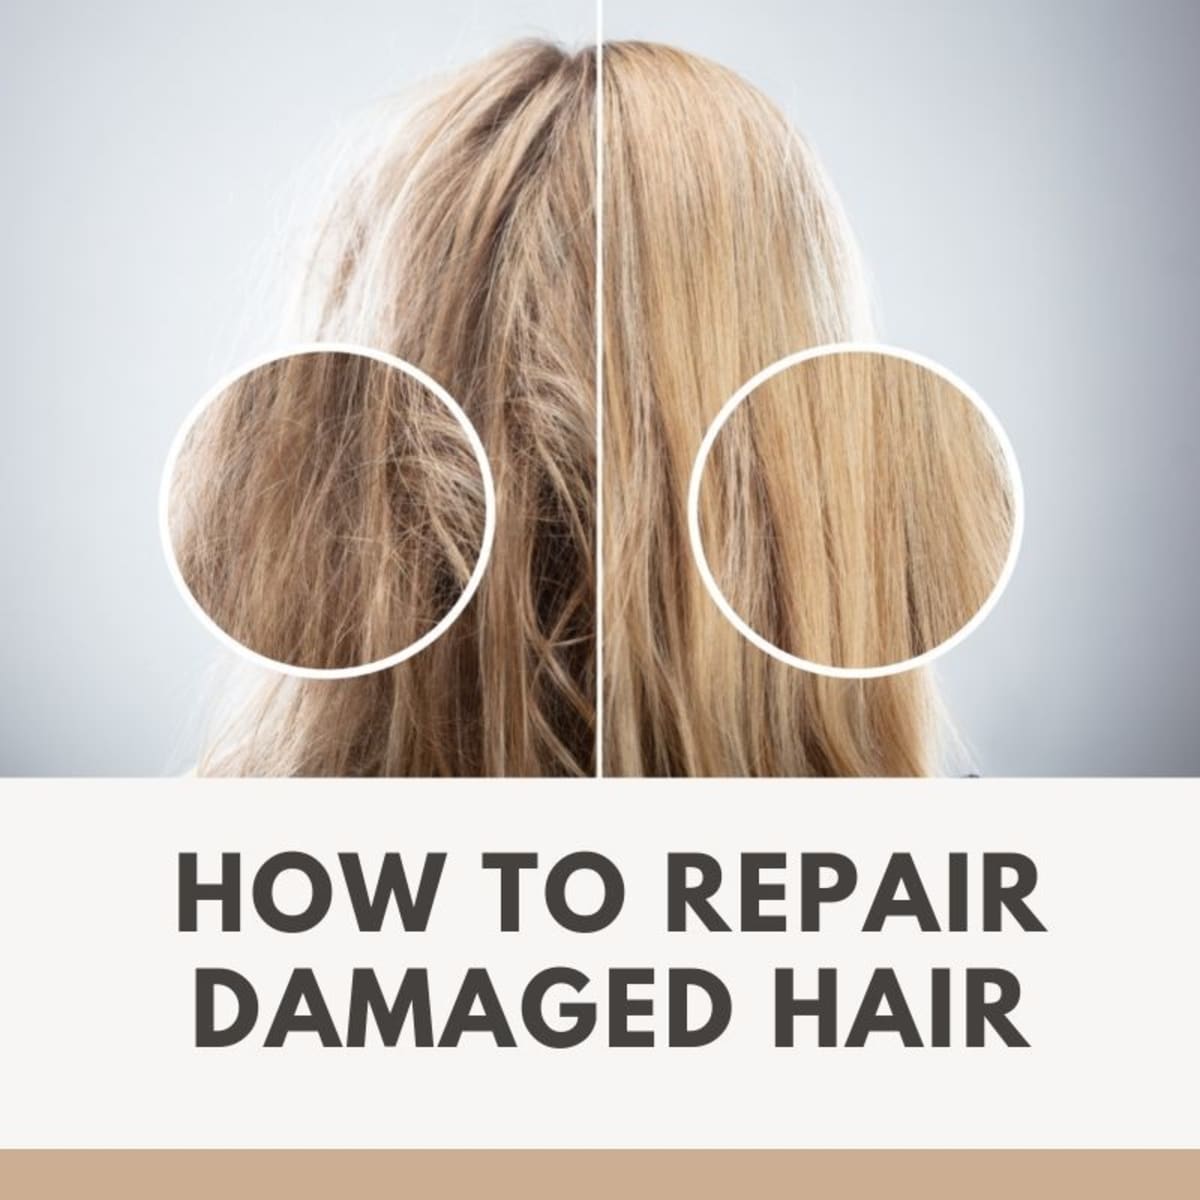 12 Techniques for how to repair broken damaged hairs!